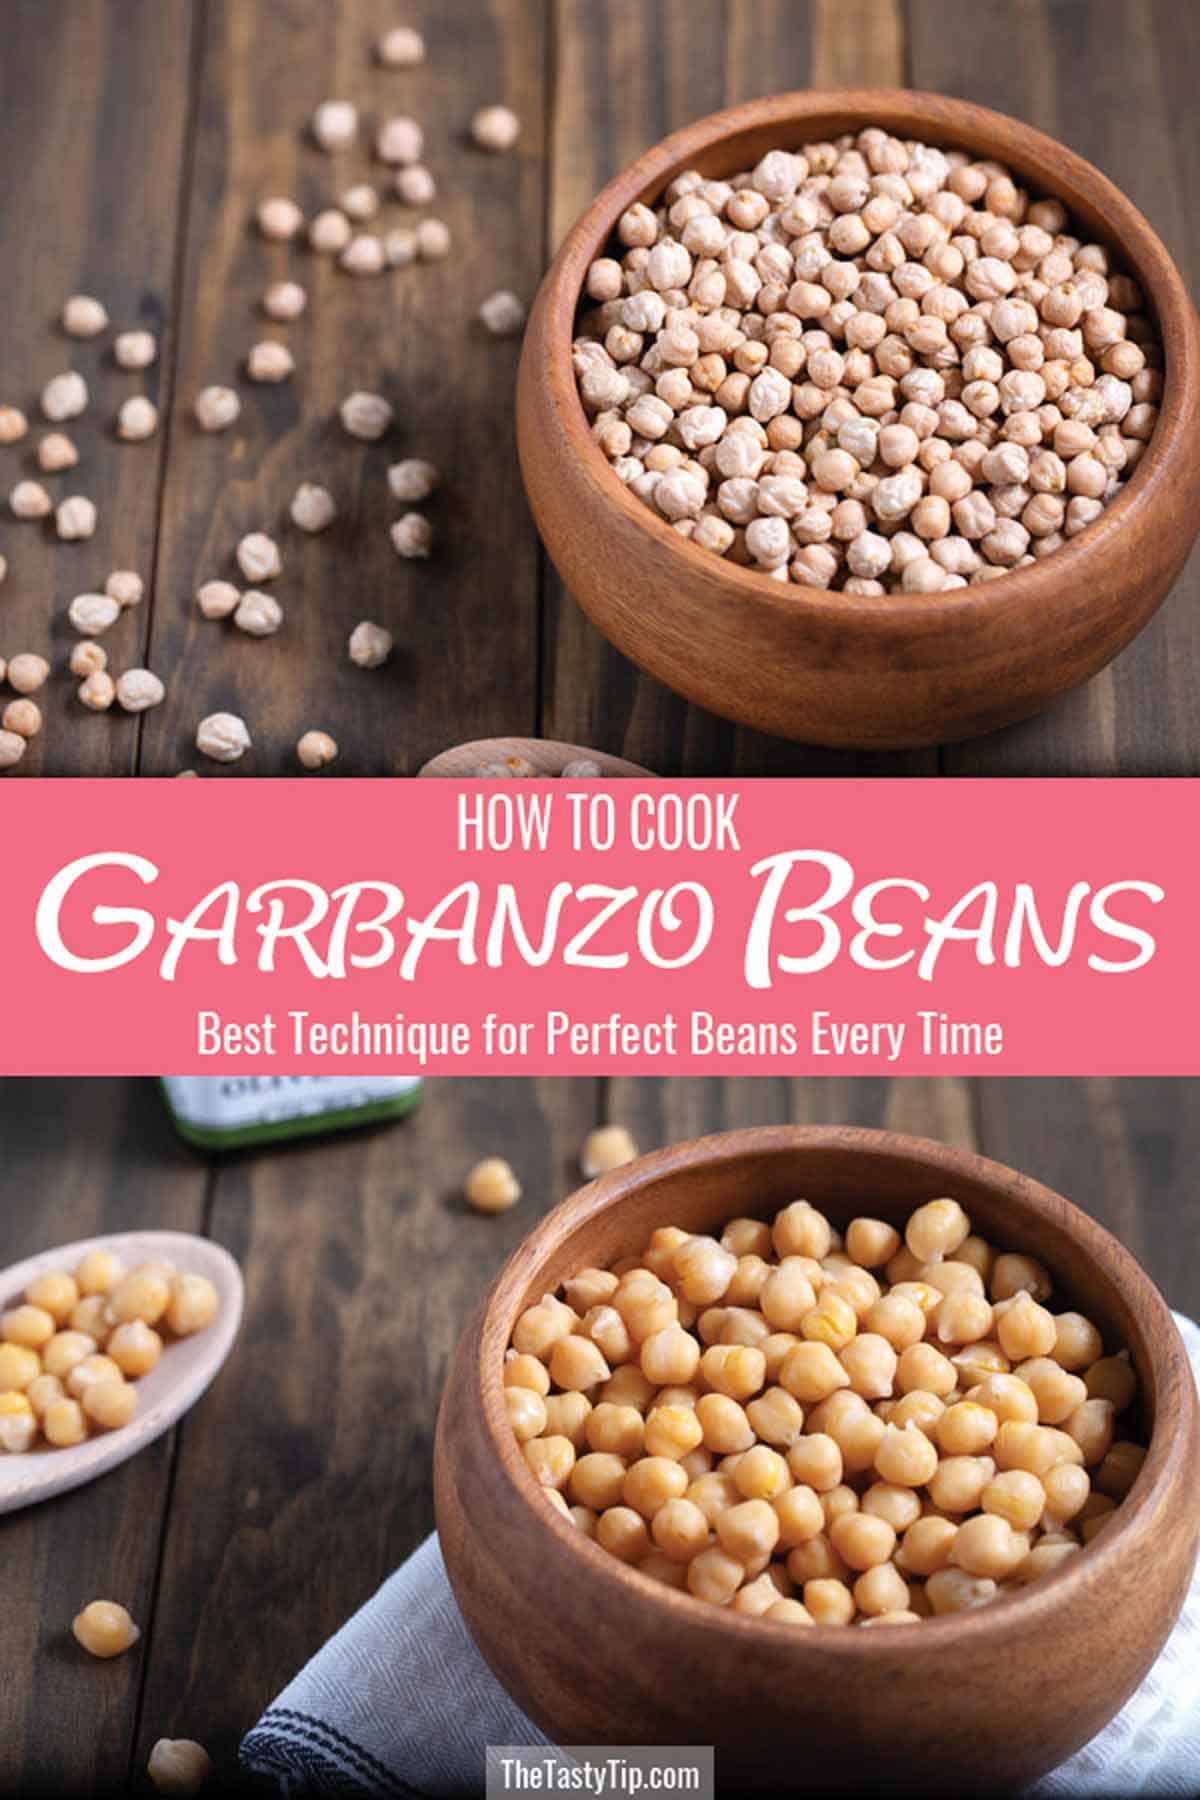 Dry garbanzo beans in a bowl and cooked garbanzo beans in a bowl.